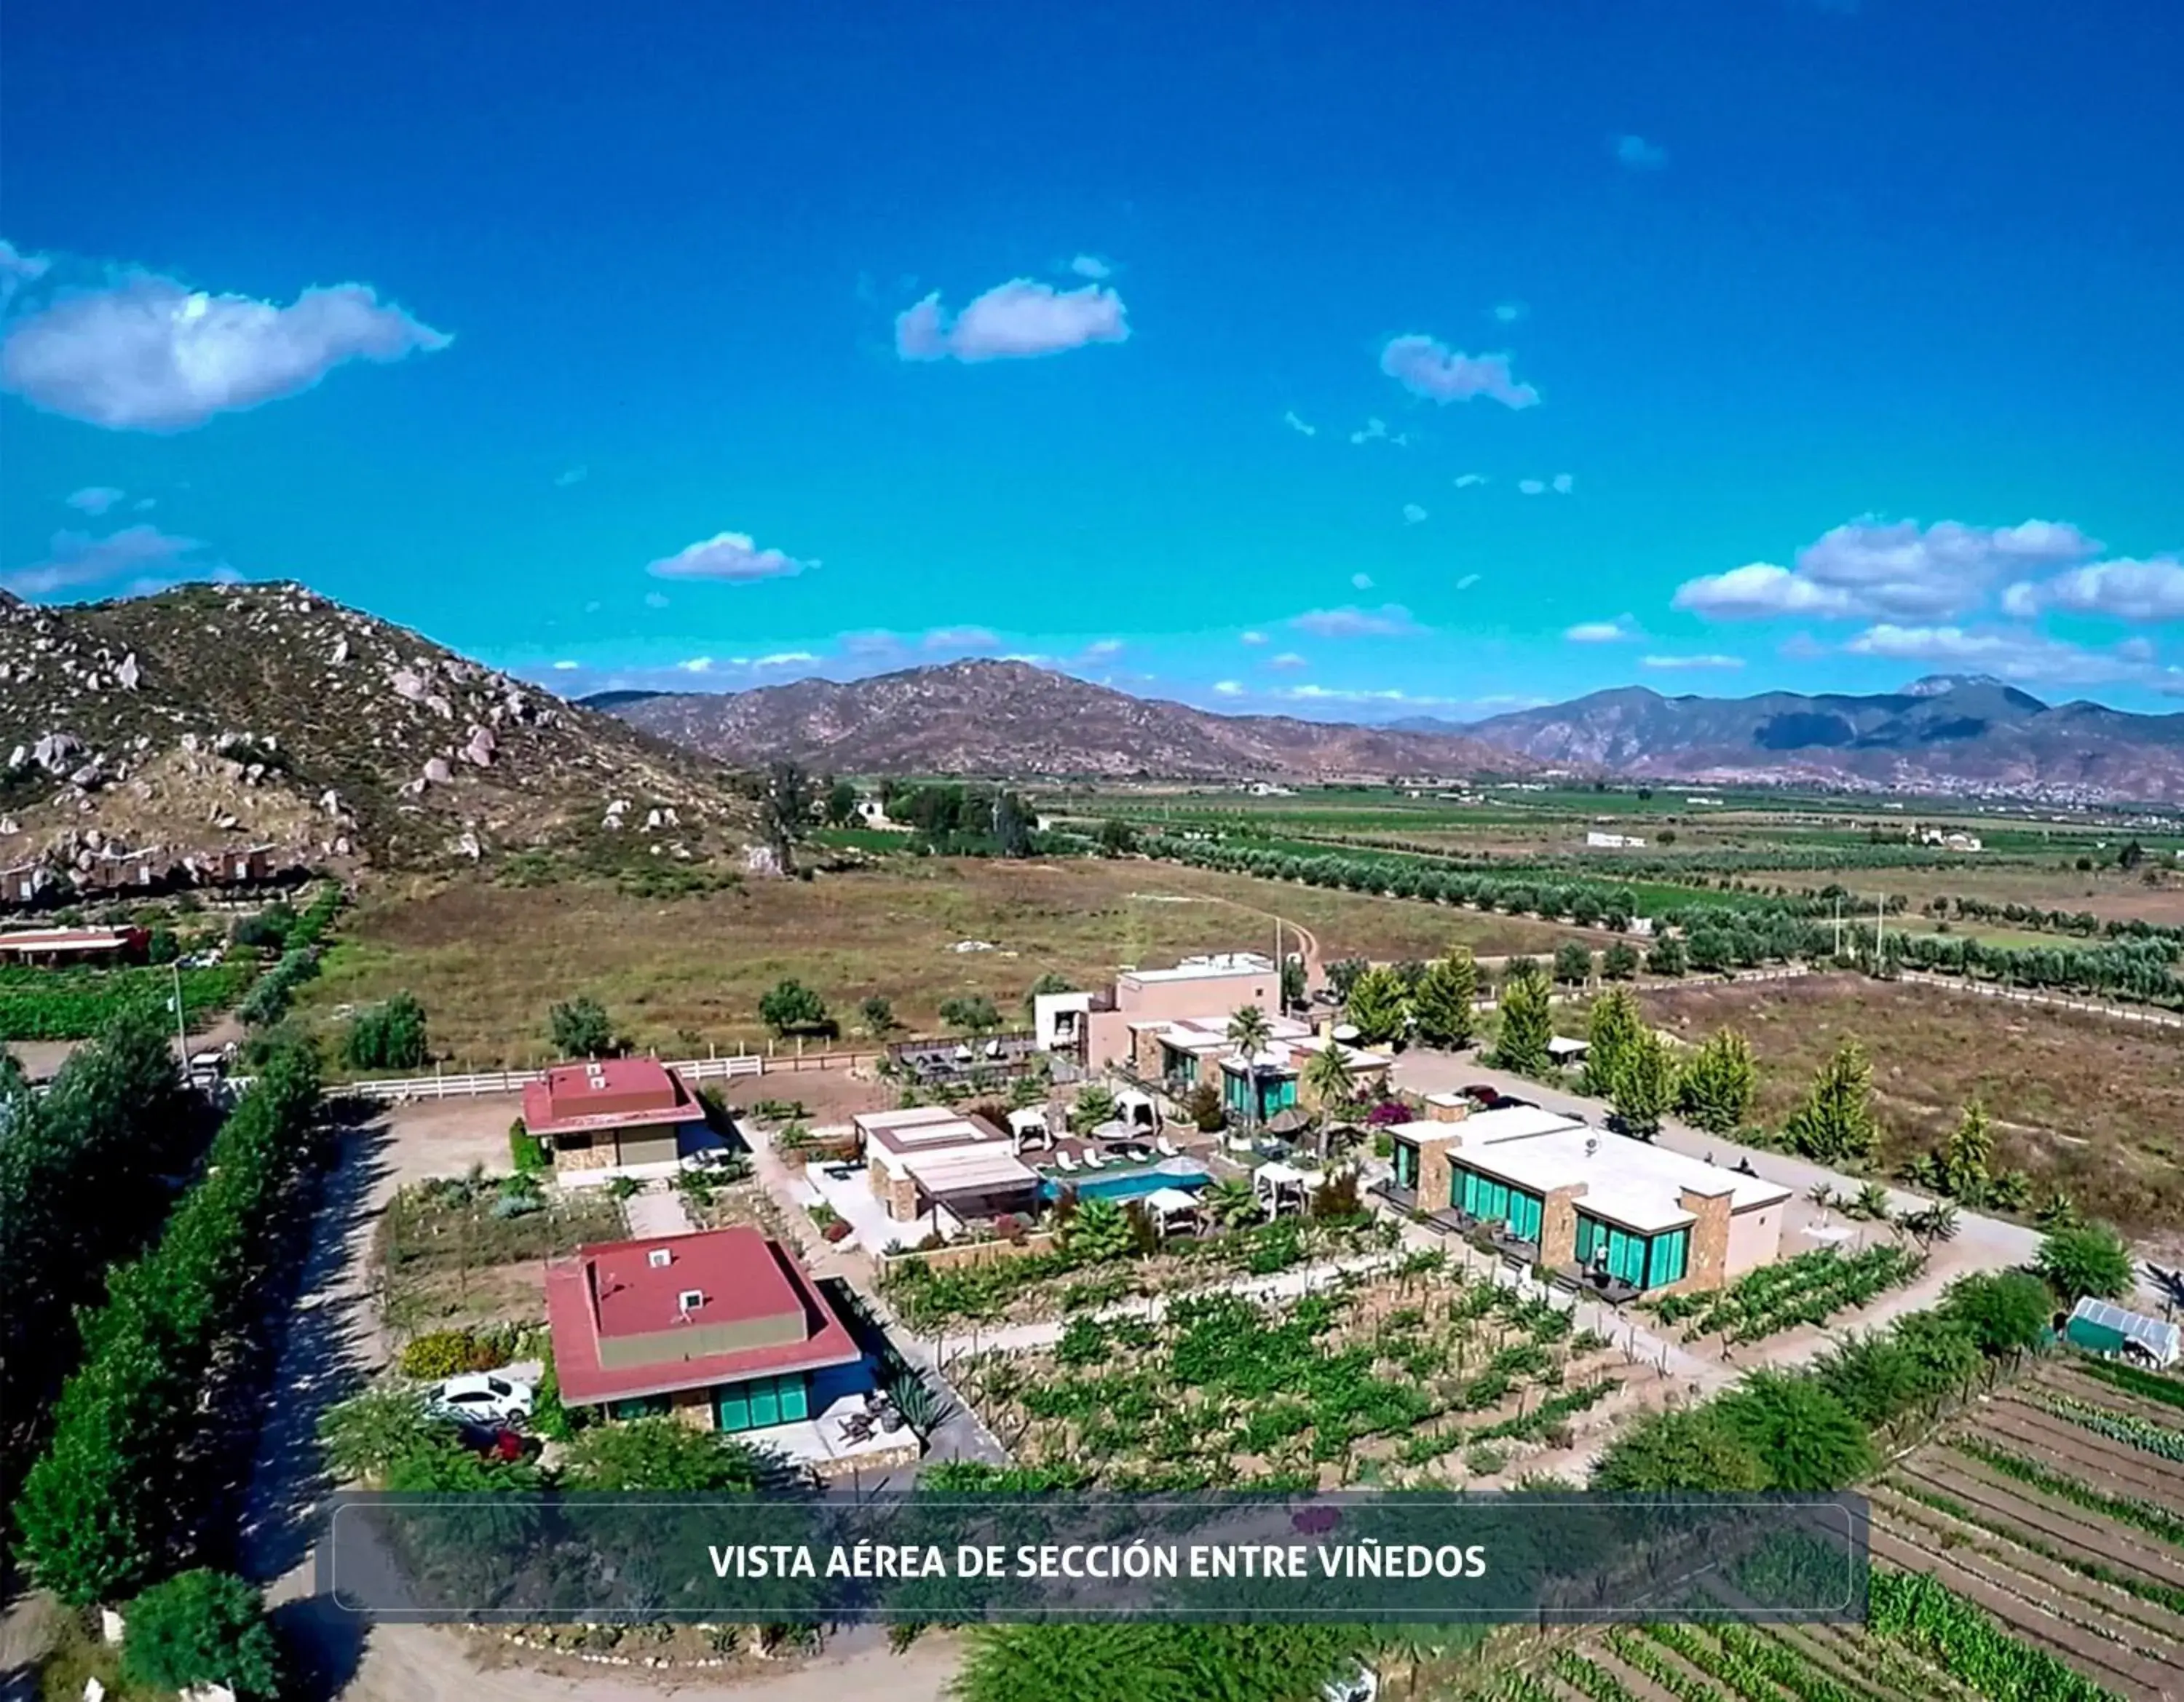 Bird's eye view in Hotel Boutique Valle de Guadalupe